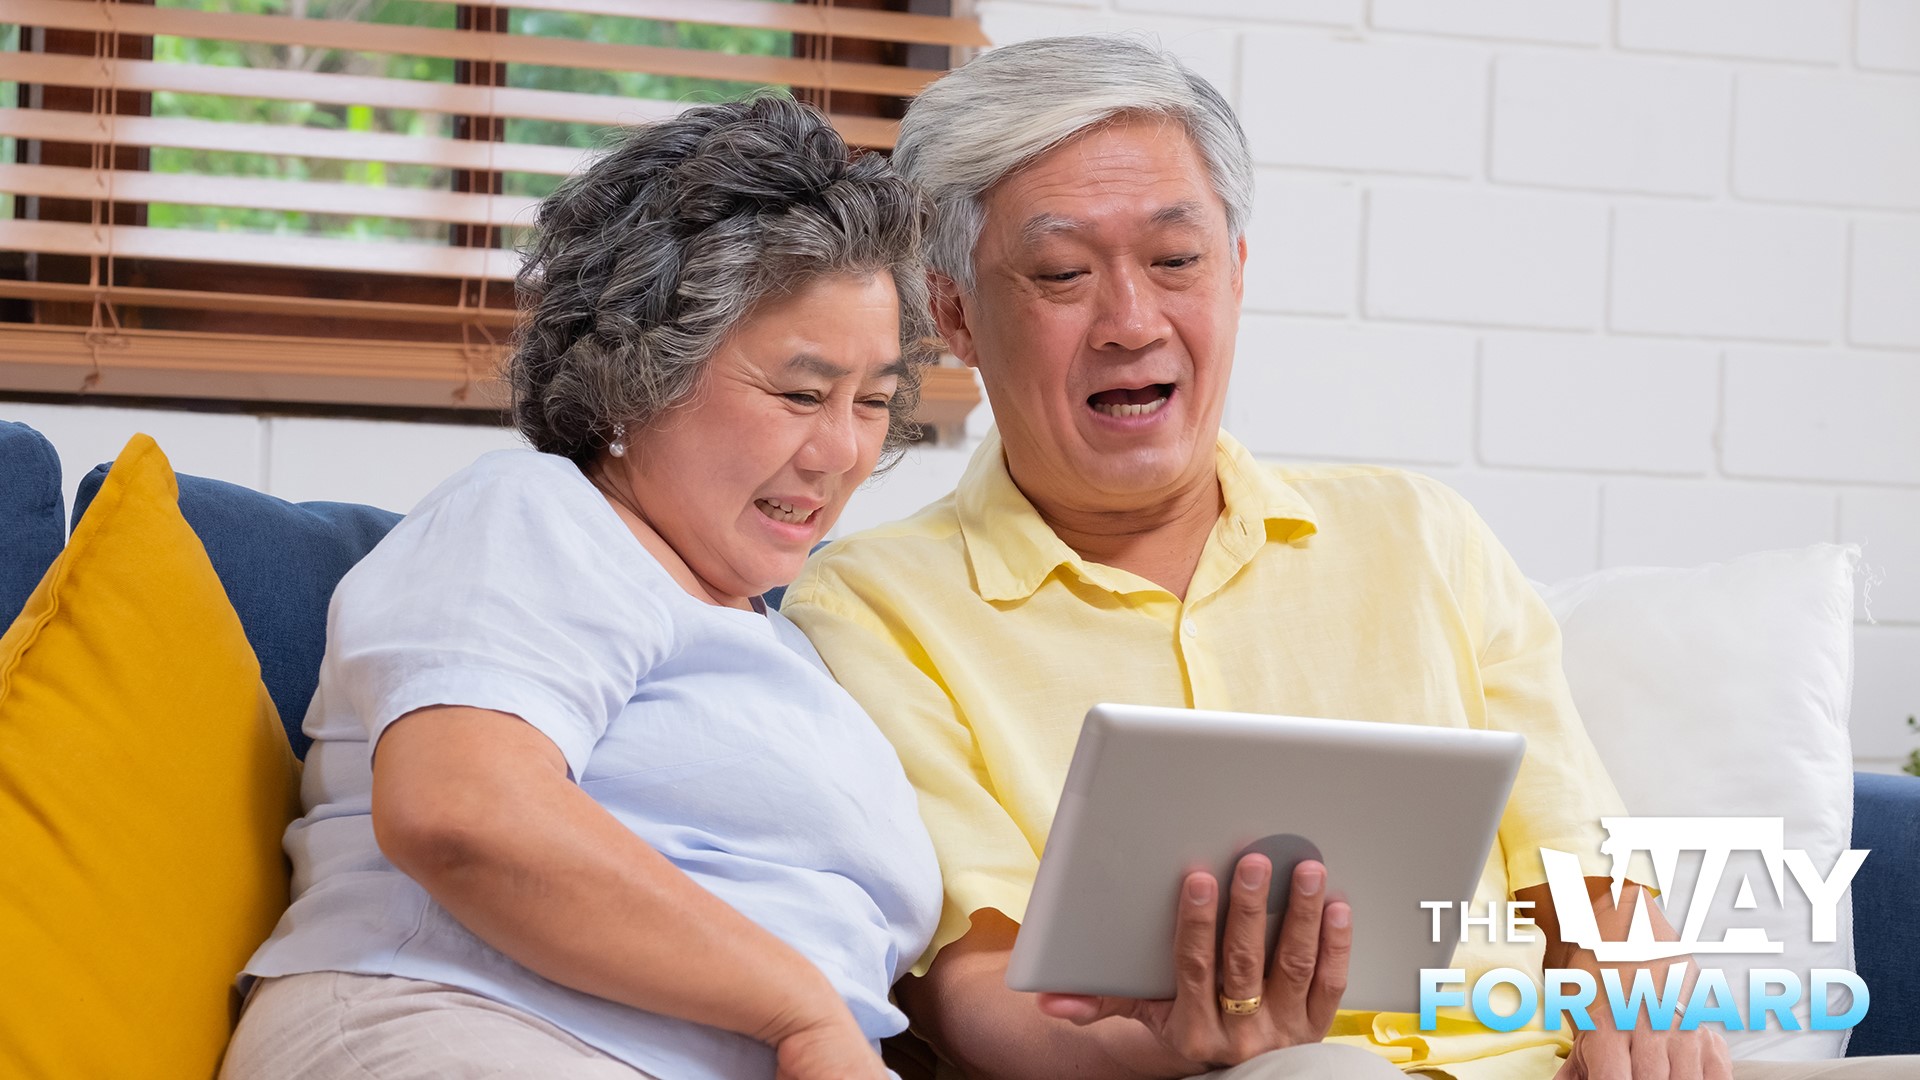 Take action! Reaching out to loved ones is important, even if it a simple message. Check in on your parents and grandparents today. Sponsored by Premera Blue Cross.